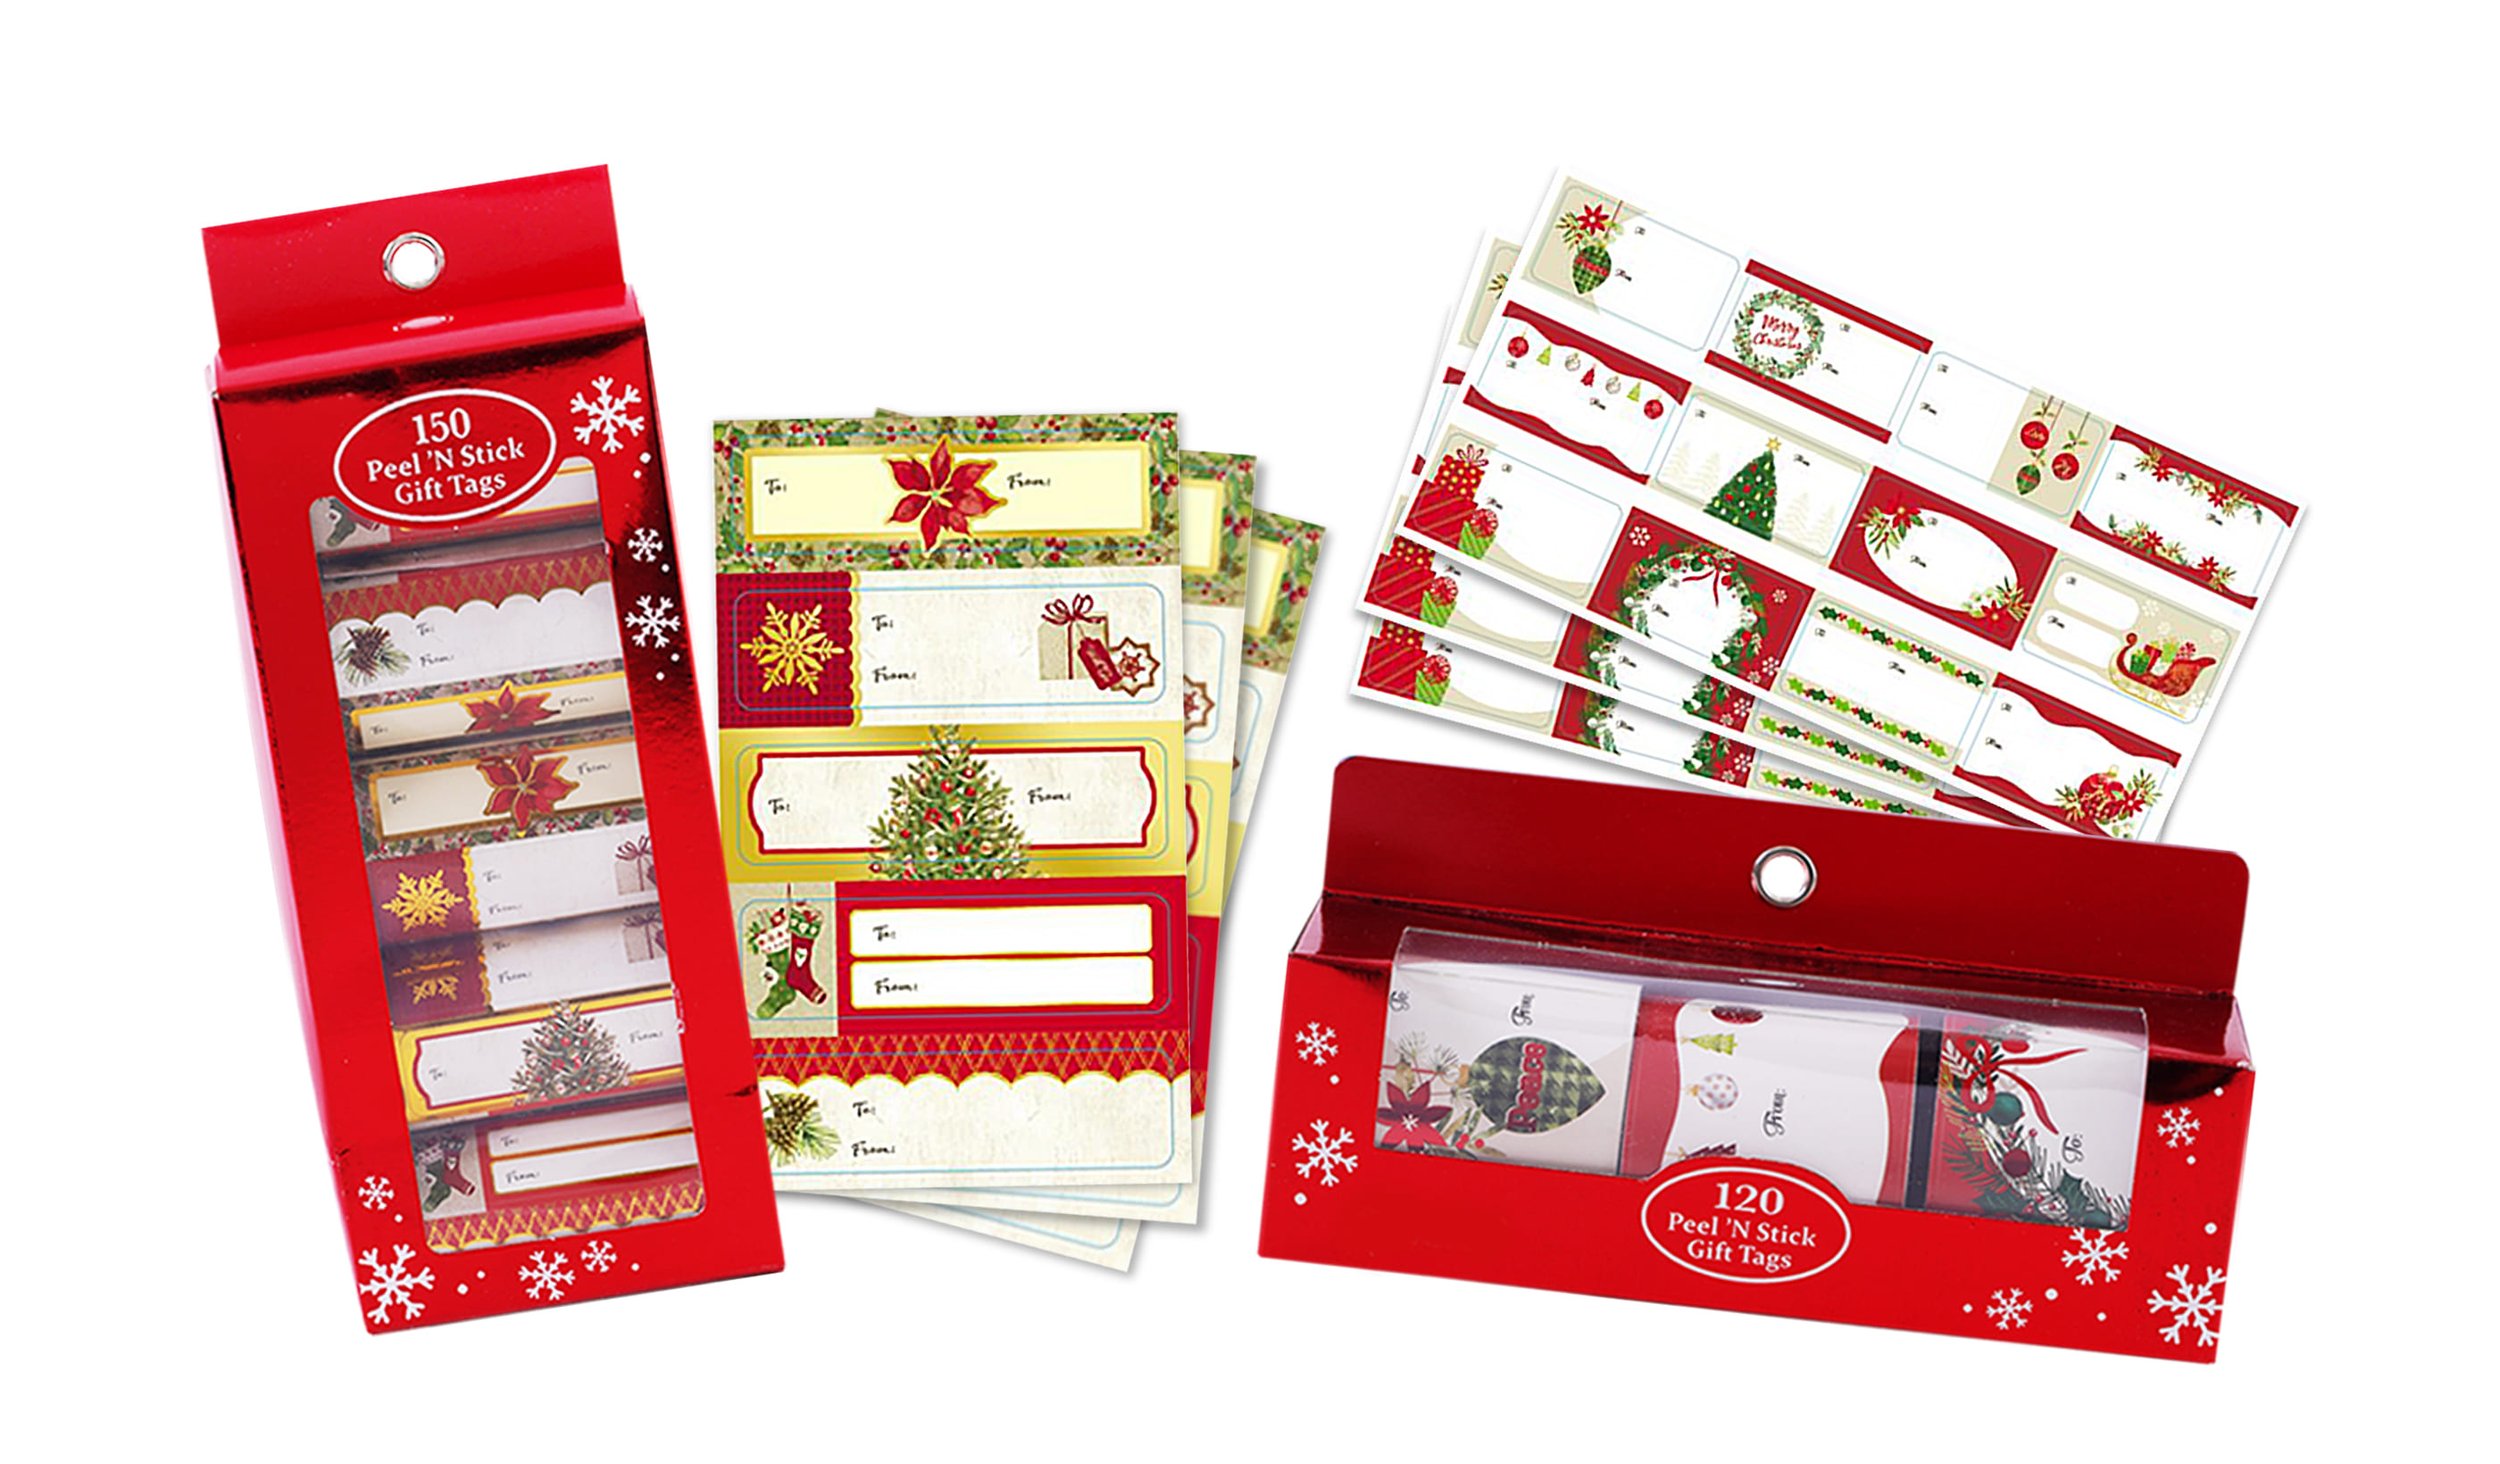 Gift Wrap & Wrapping Accessories — FLOMO - Wholesale Seasonal Products:  Gifts, Party & School supplies plus Holiday decorations